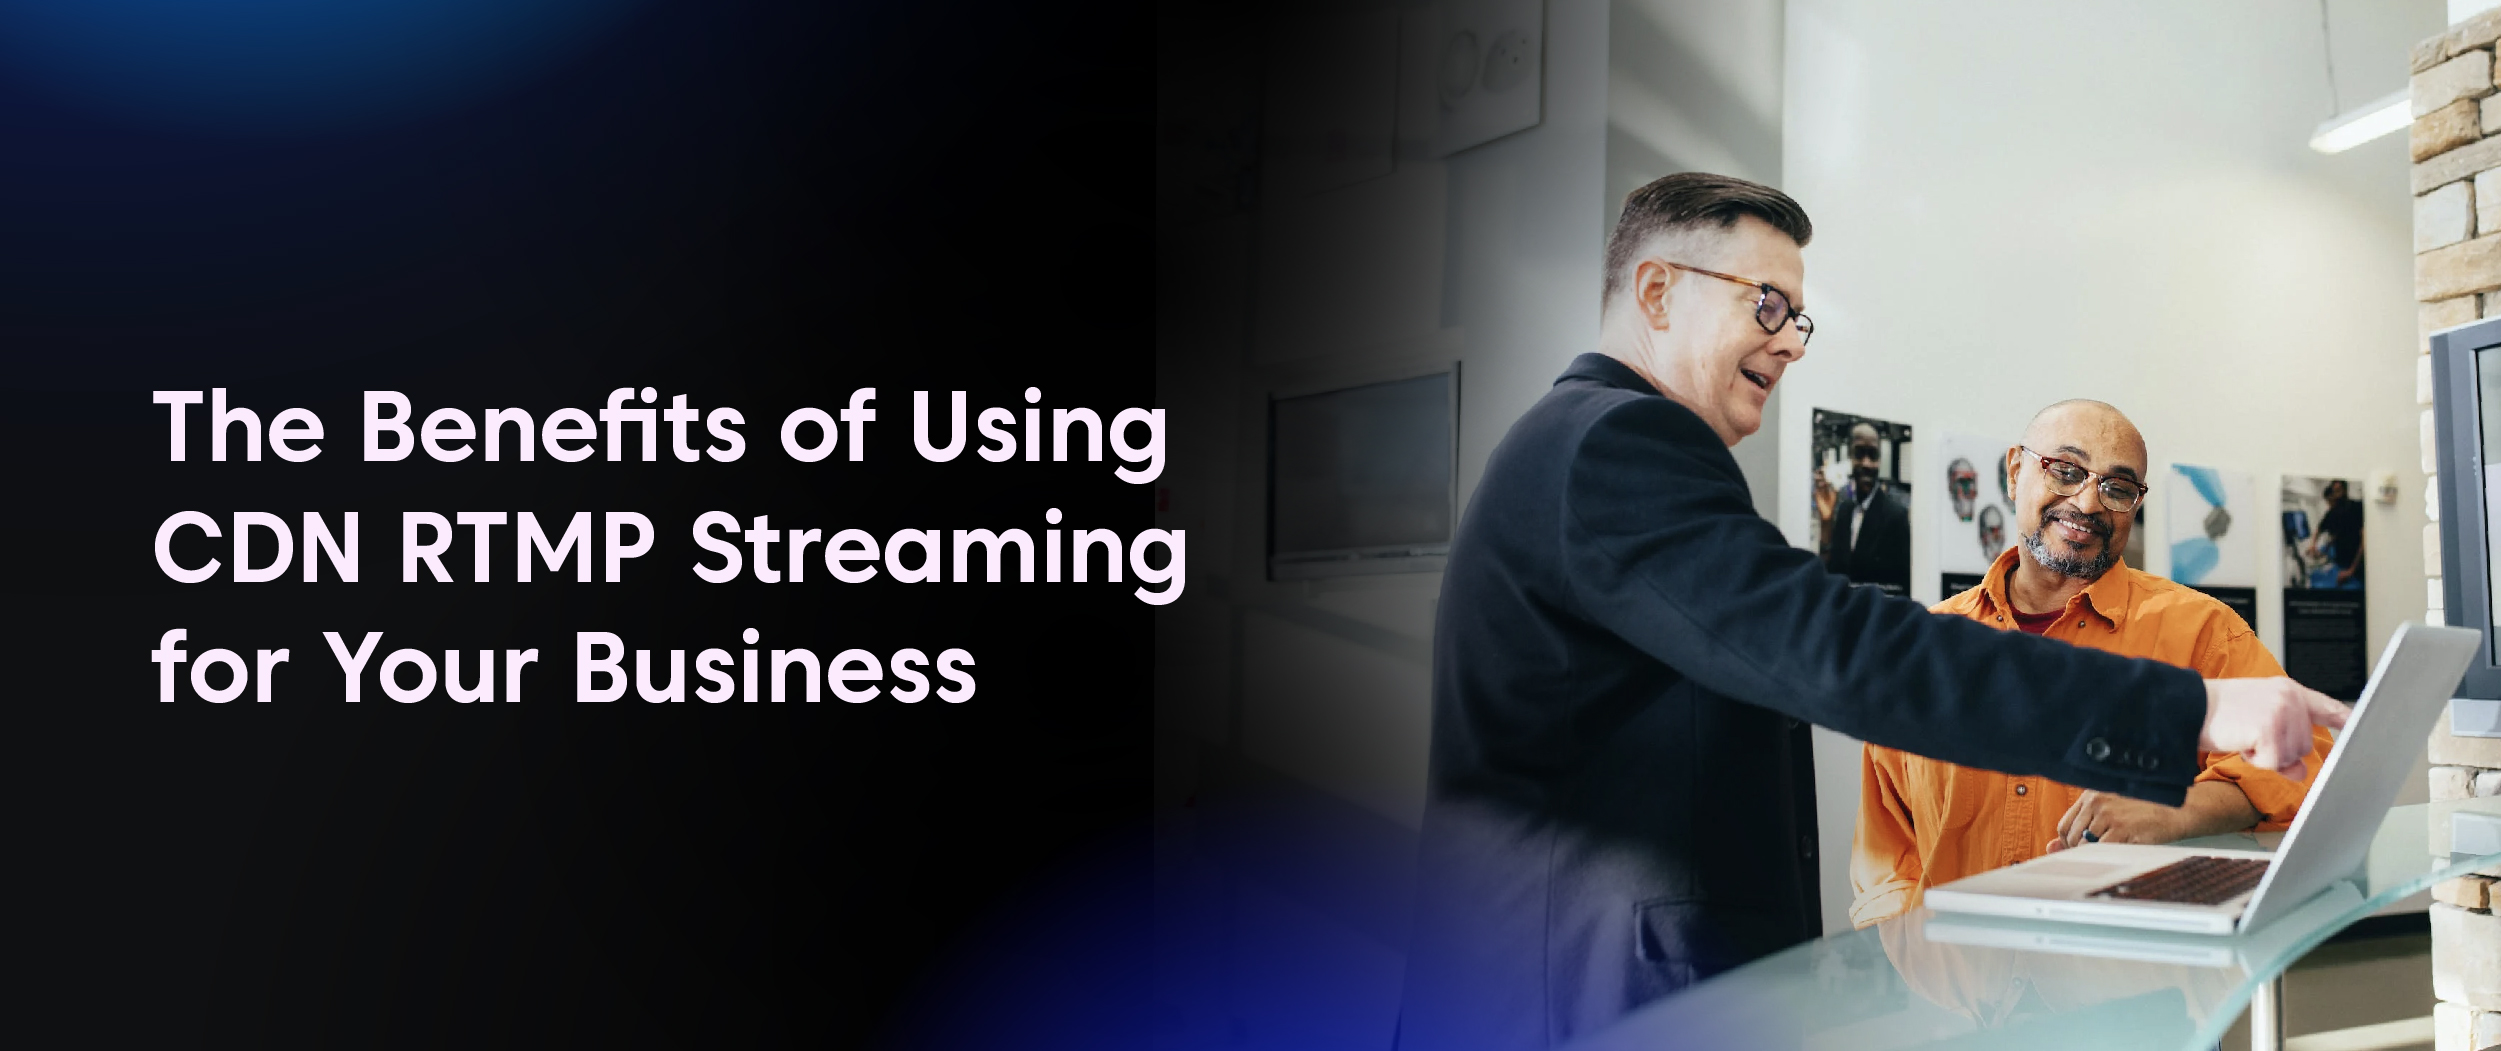 The Benefits of Using CDN RTMP Streaming for Your Business